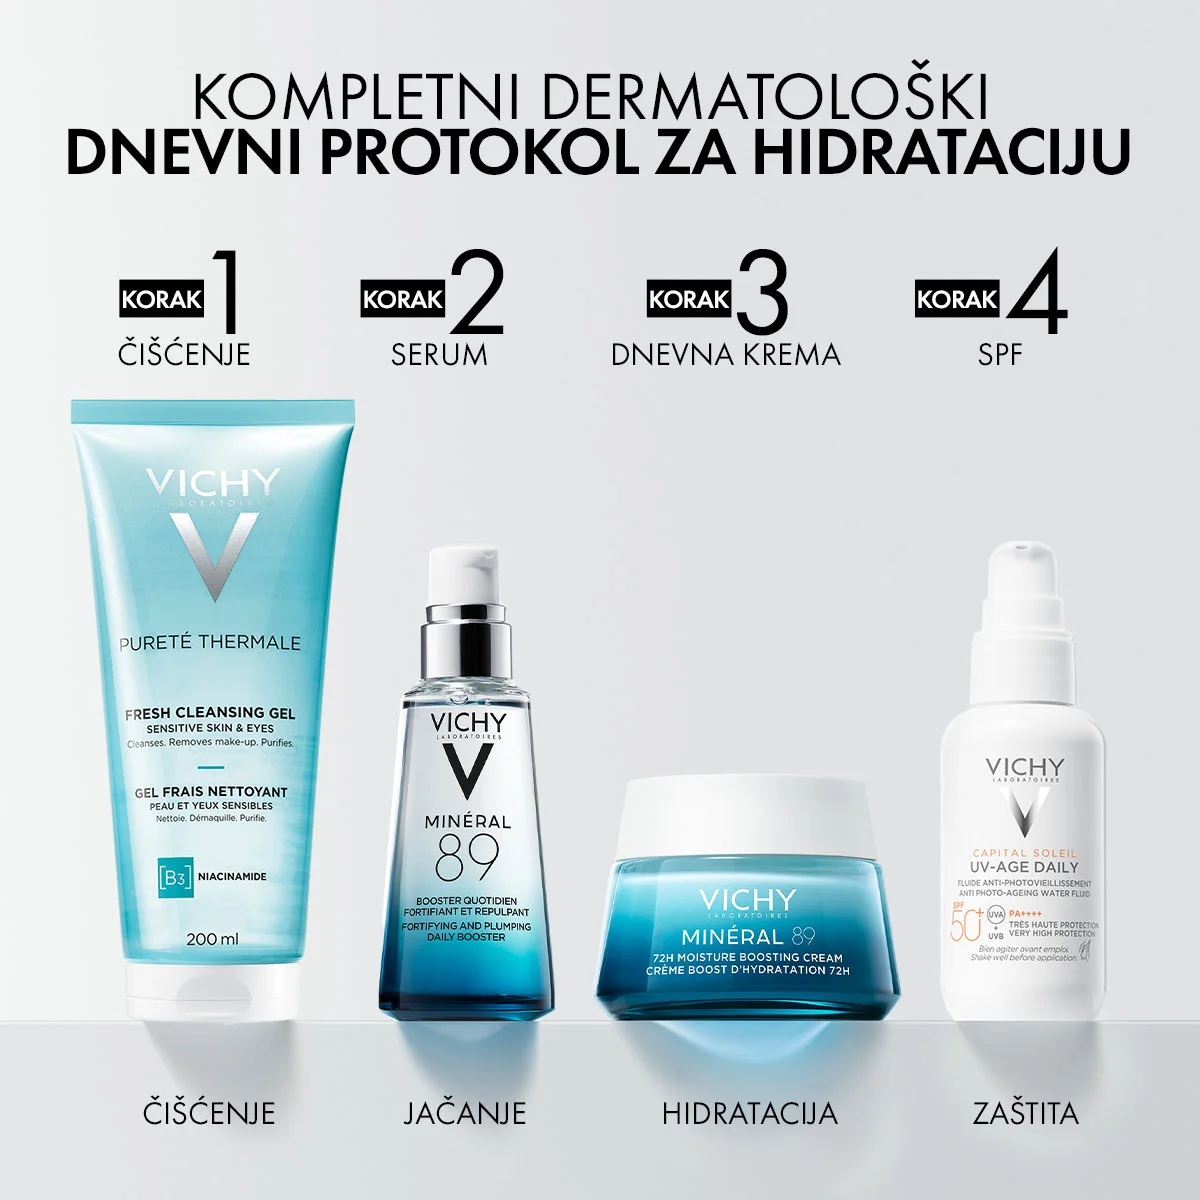 Vichy MINERAL 89 Protocol for intensive hydration and stronger skin for all skin types (8)